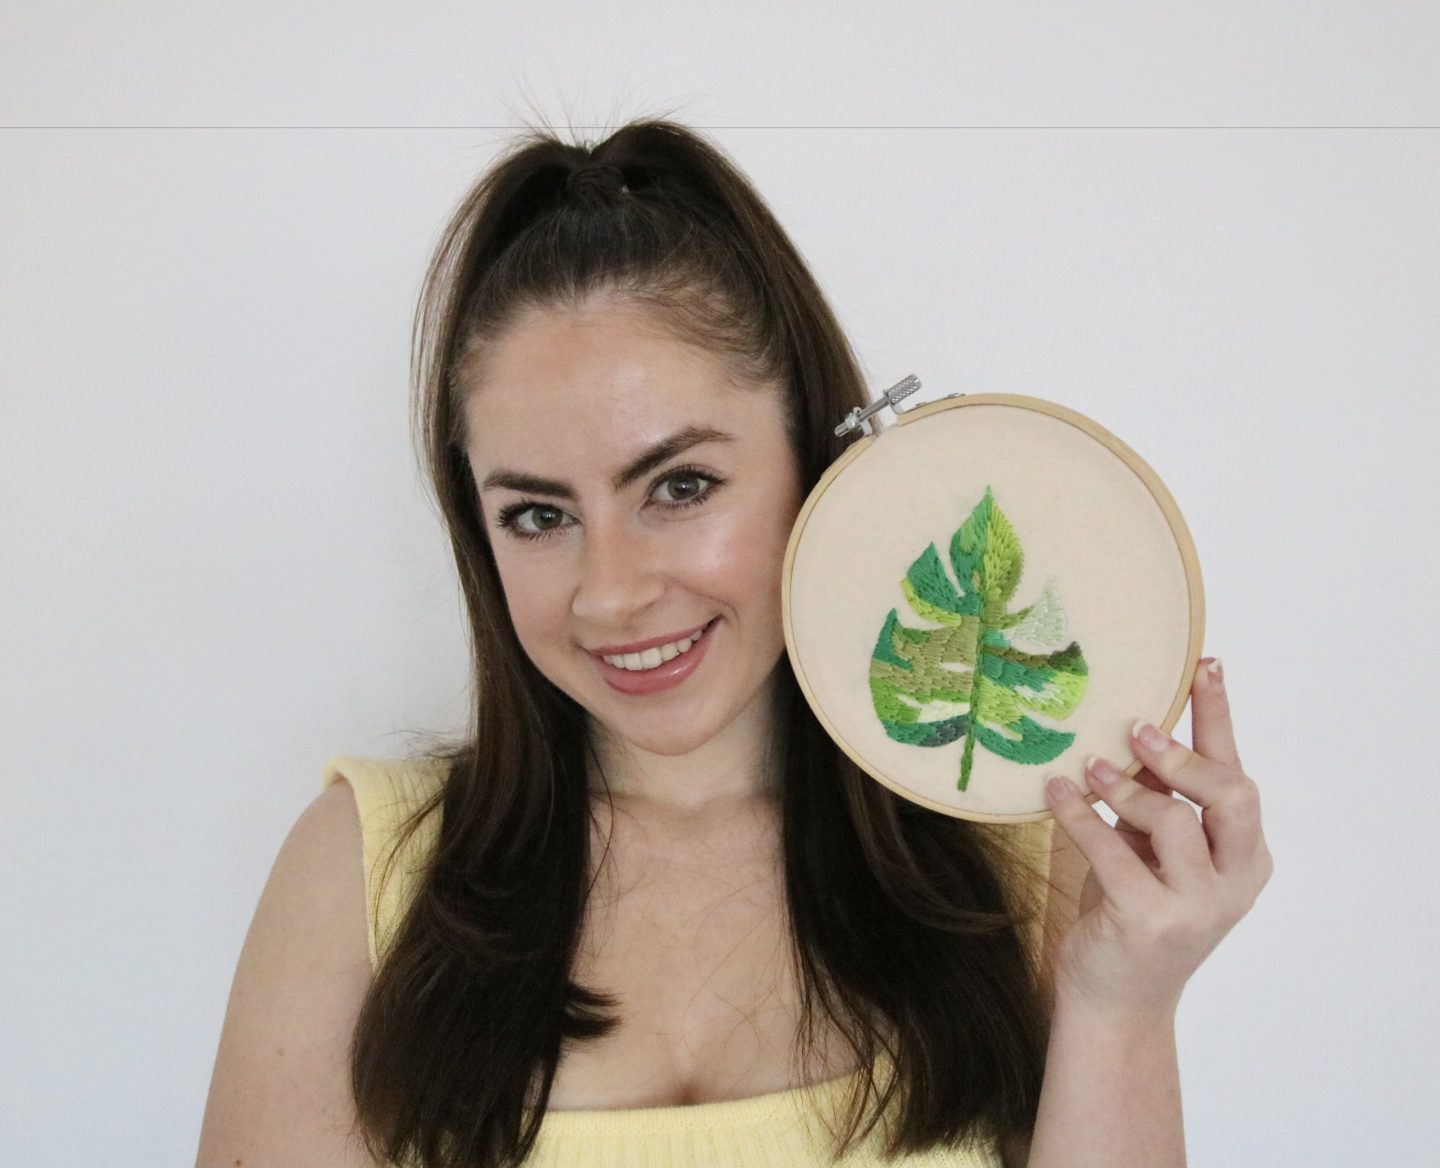 A brunette girl smiling and holding a 6 inch embroidery hoop hand embroidered with a green monstera leaf